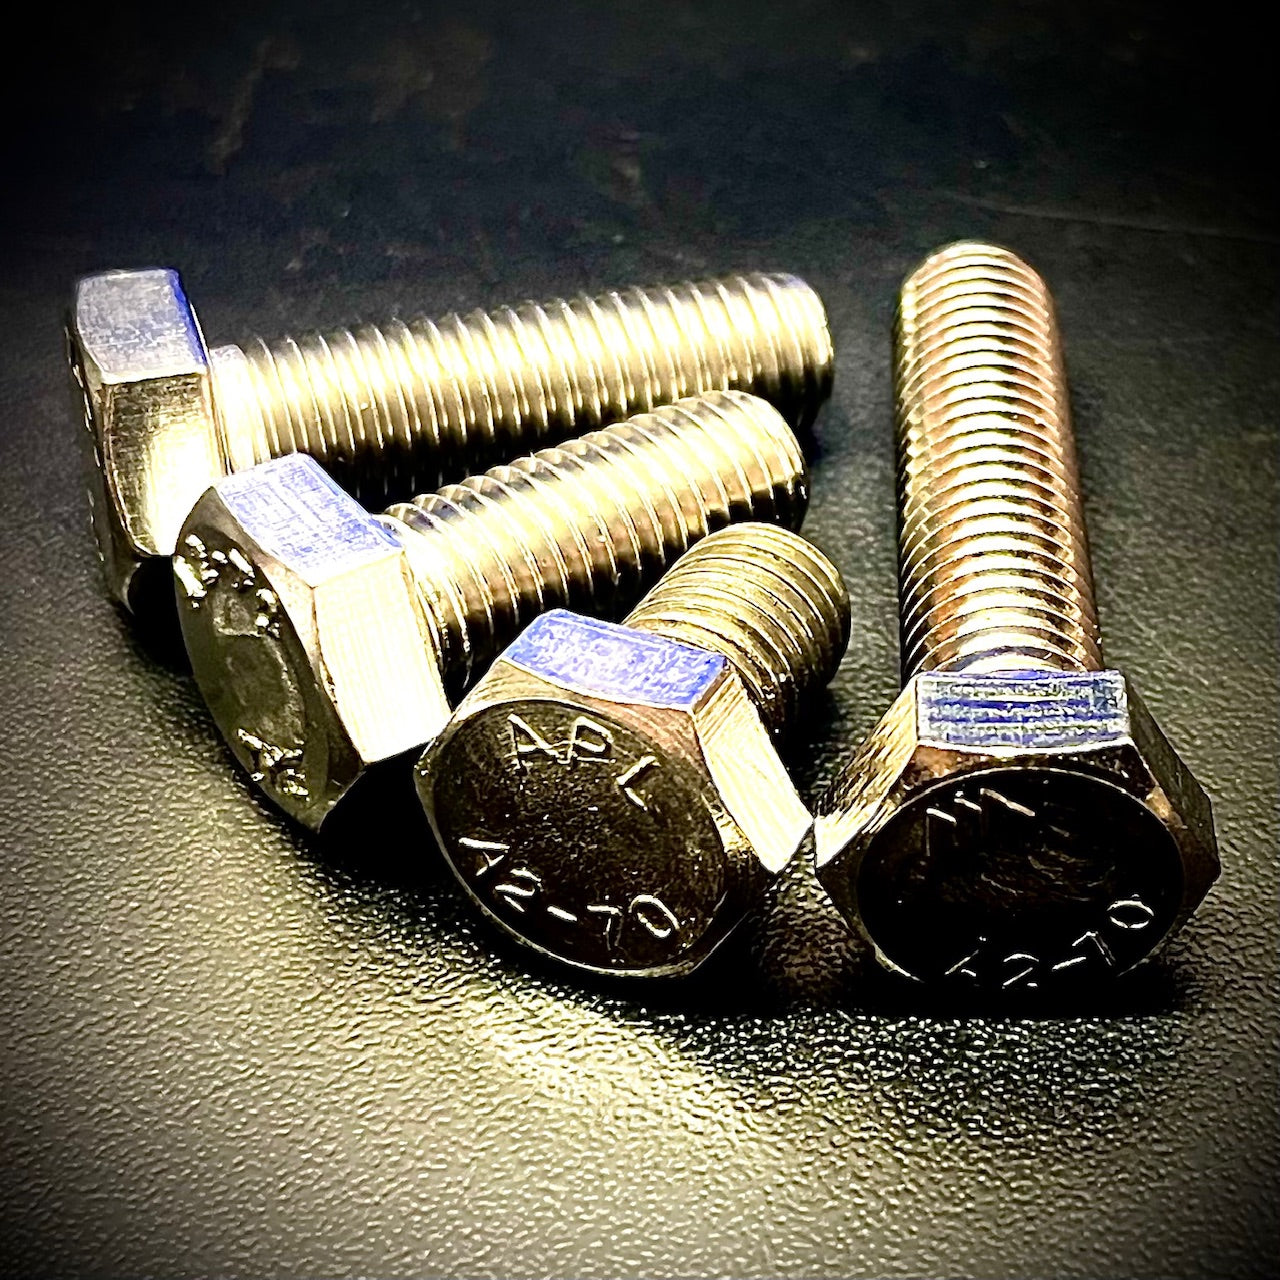 M6 x Over 45mm Hex Set Screw A2 304 Stainless - Fixaball Ltd. Fixings and Fasteners UK